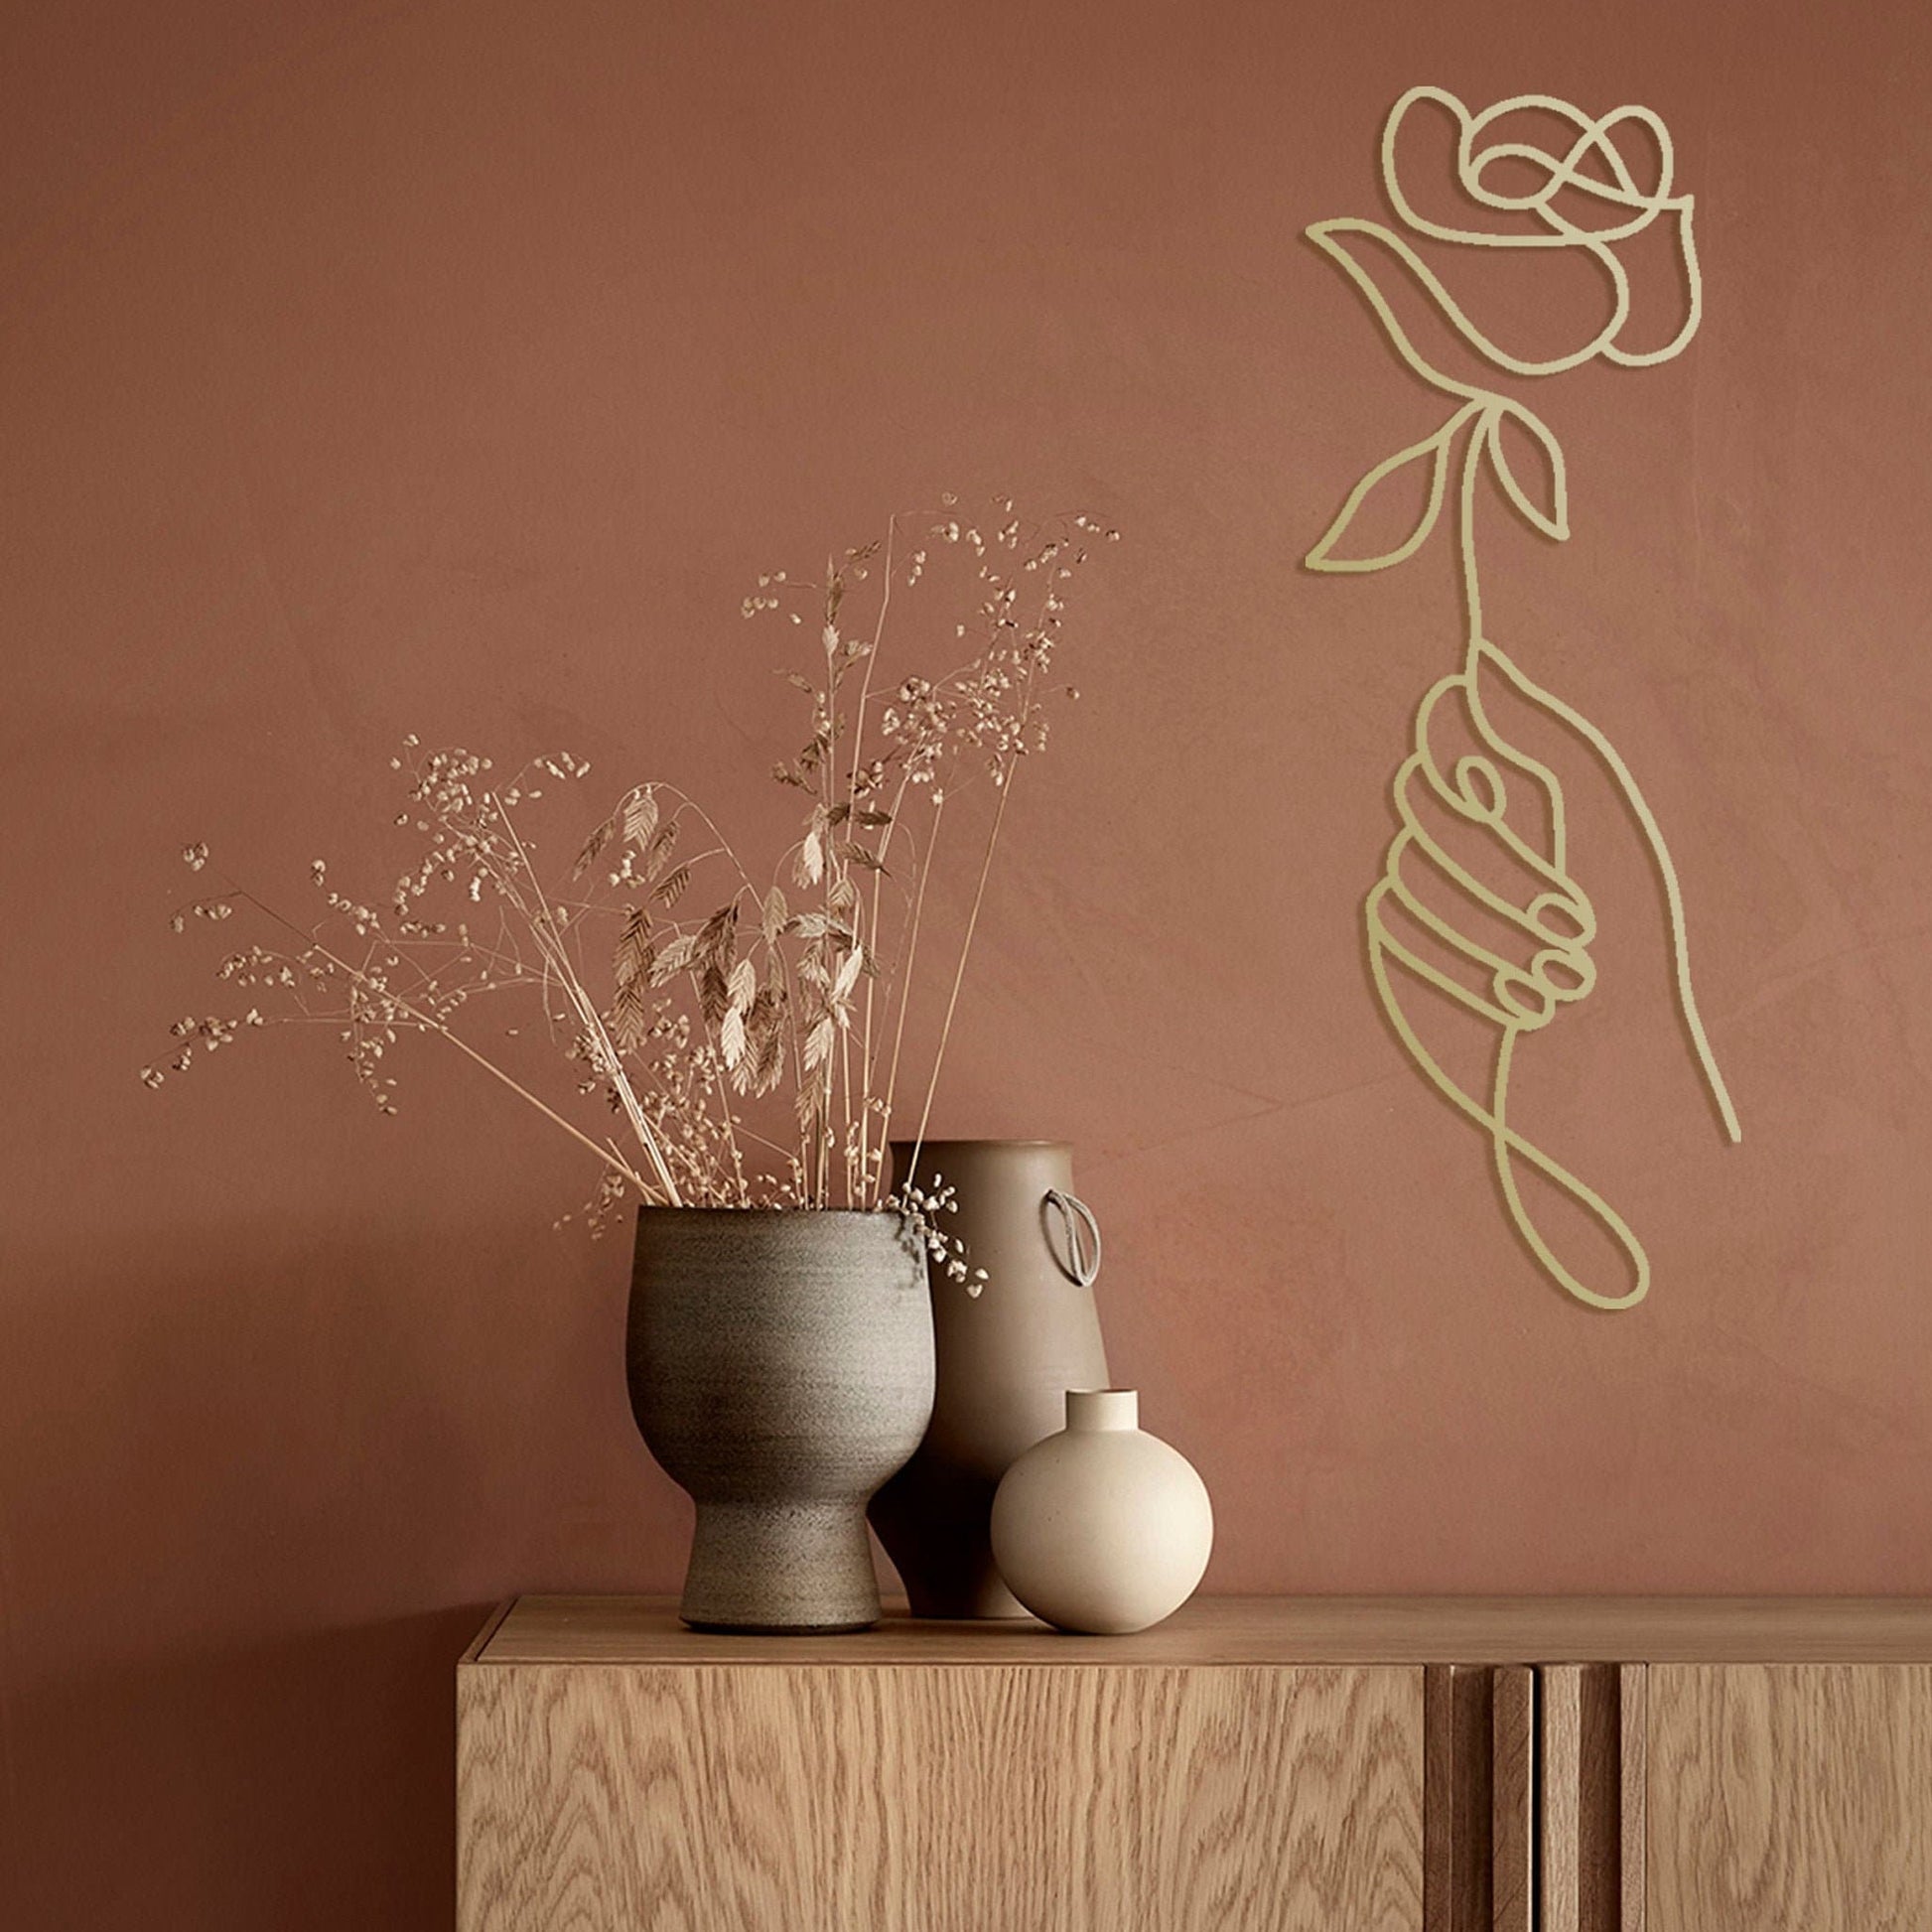 Hand with a Rose, One Line Art, Rose Gold Wall Art, Gold Wall Decor, Metal Wall Art, Bridal Shower Gift, Unique Wall Decor